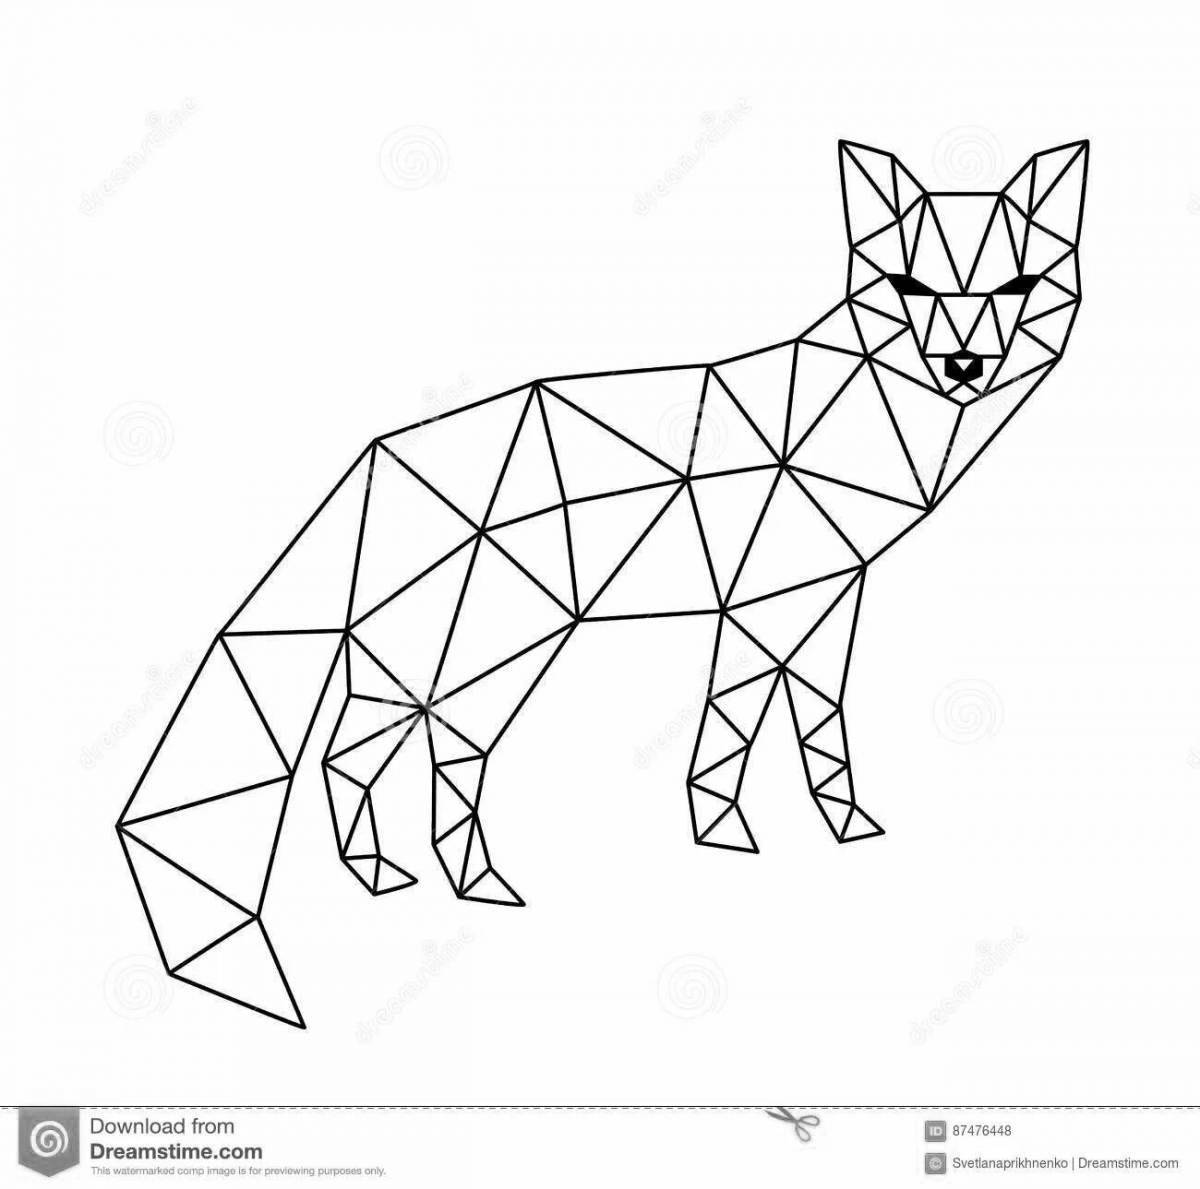 Coloring page with bold polygon